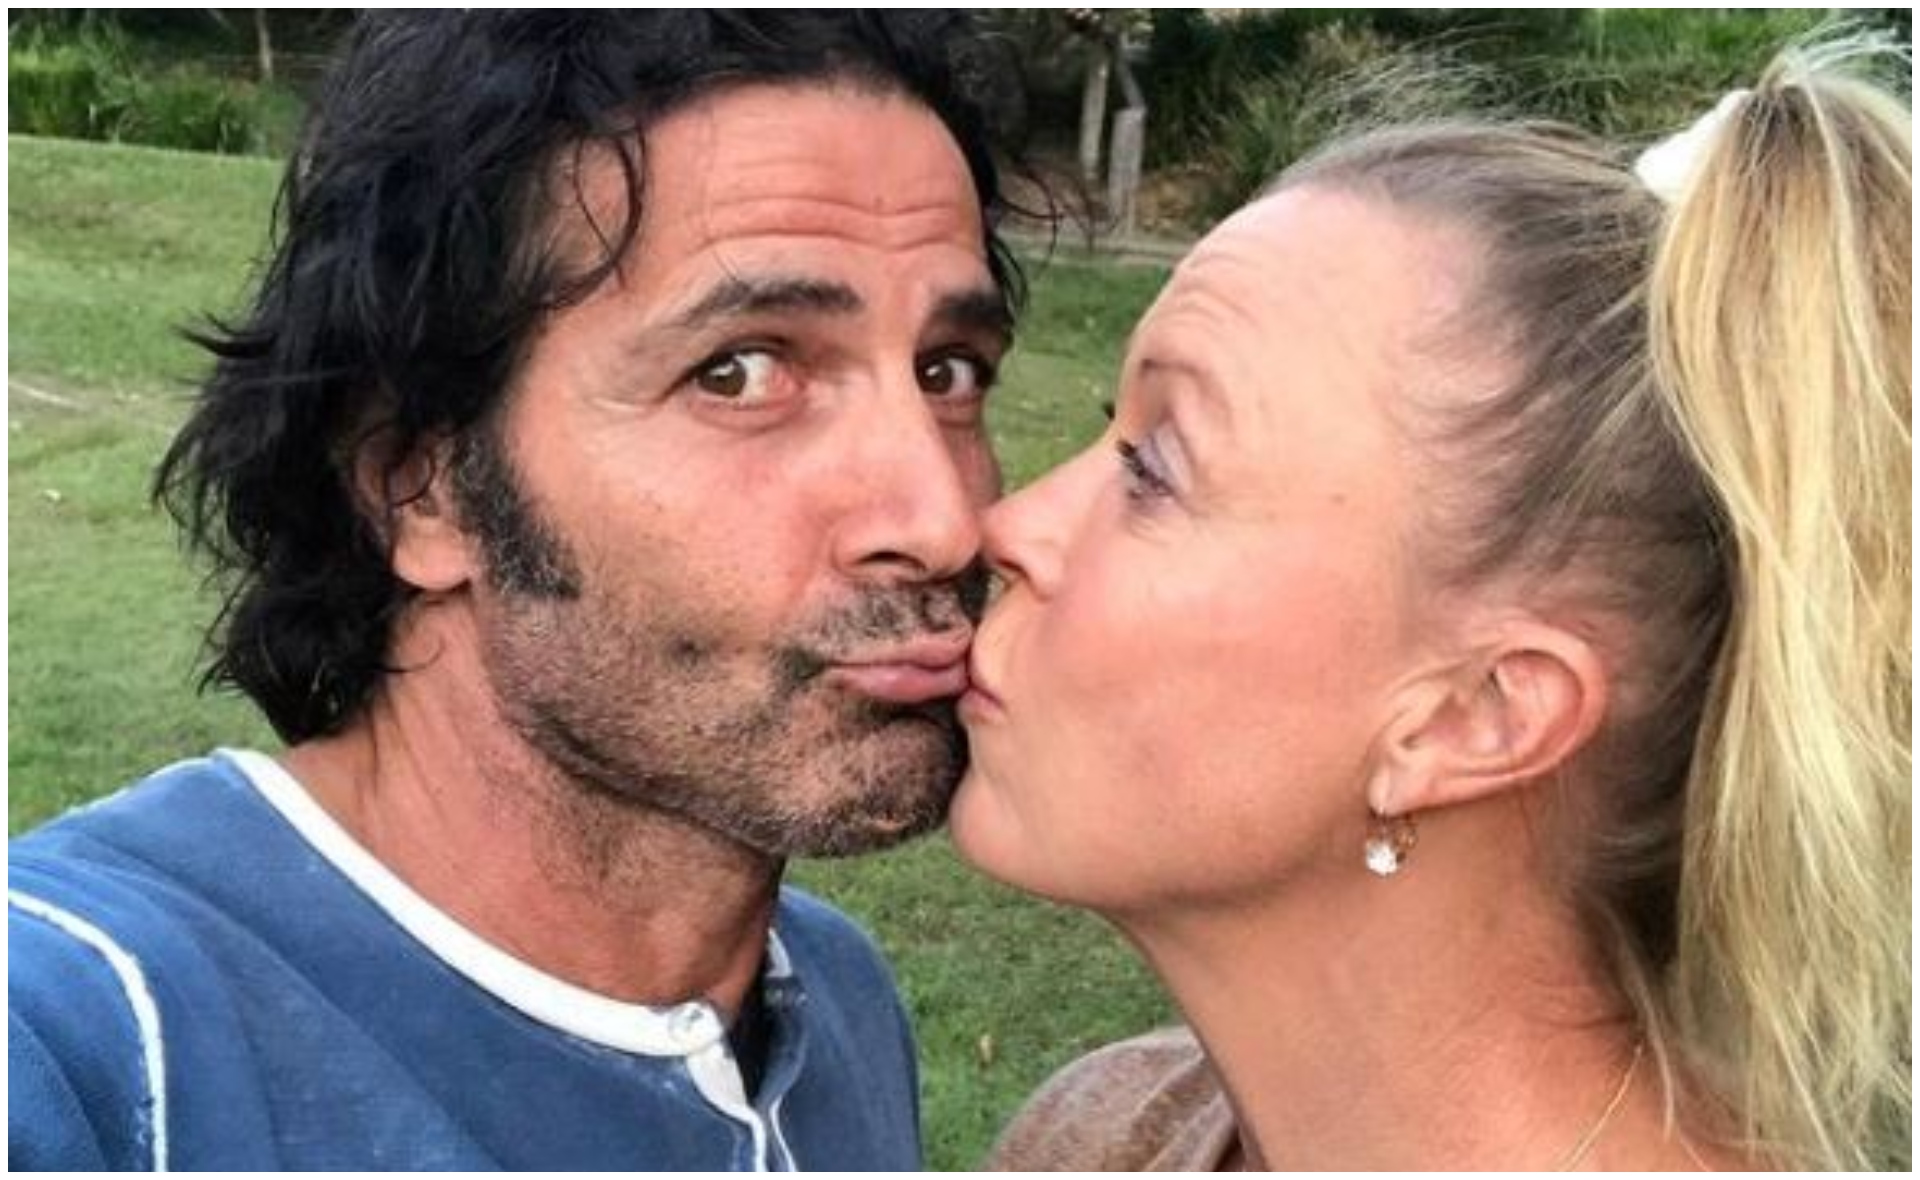 “He makes my heart sing”: Inside the beautiful, supportive romance between Lisa Curry & Mark Tabone